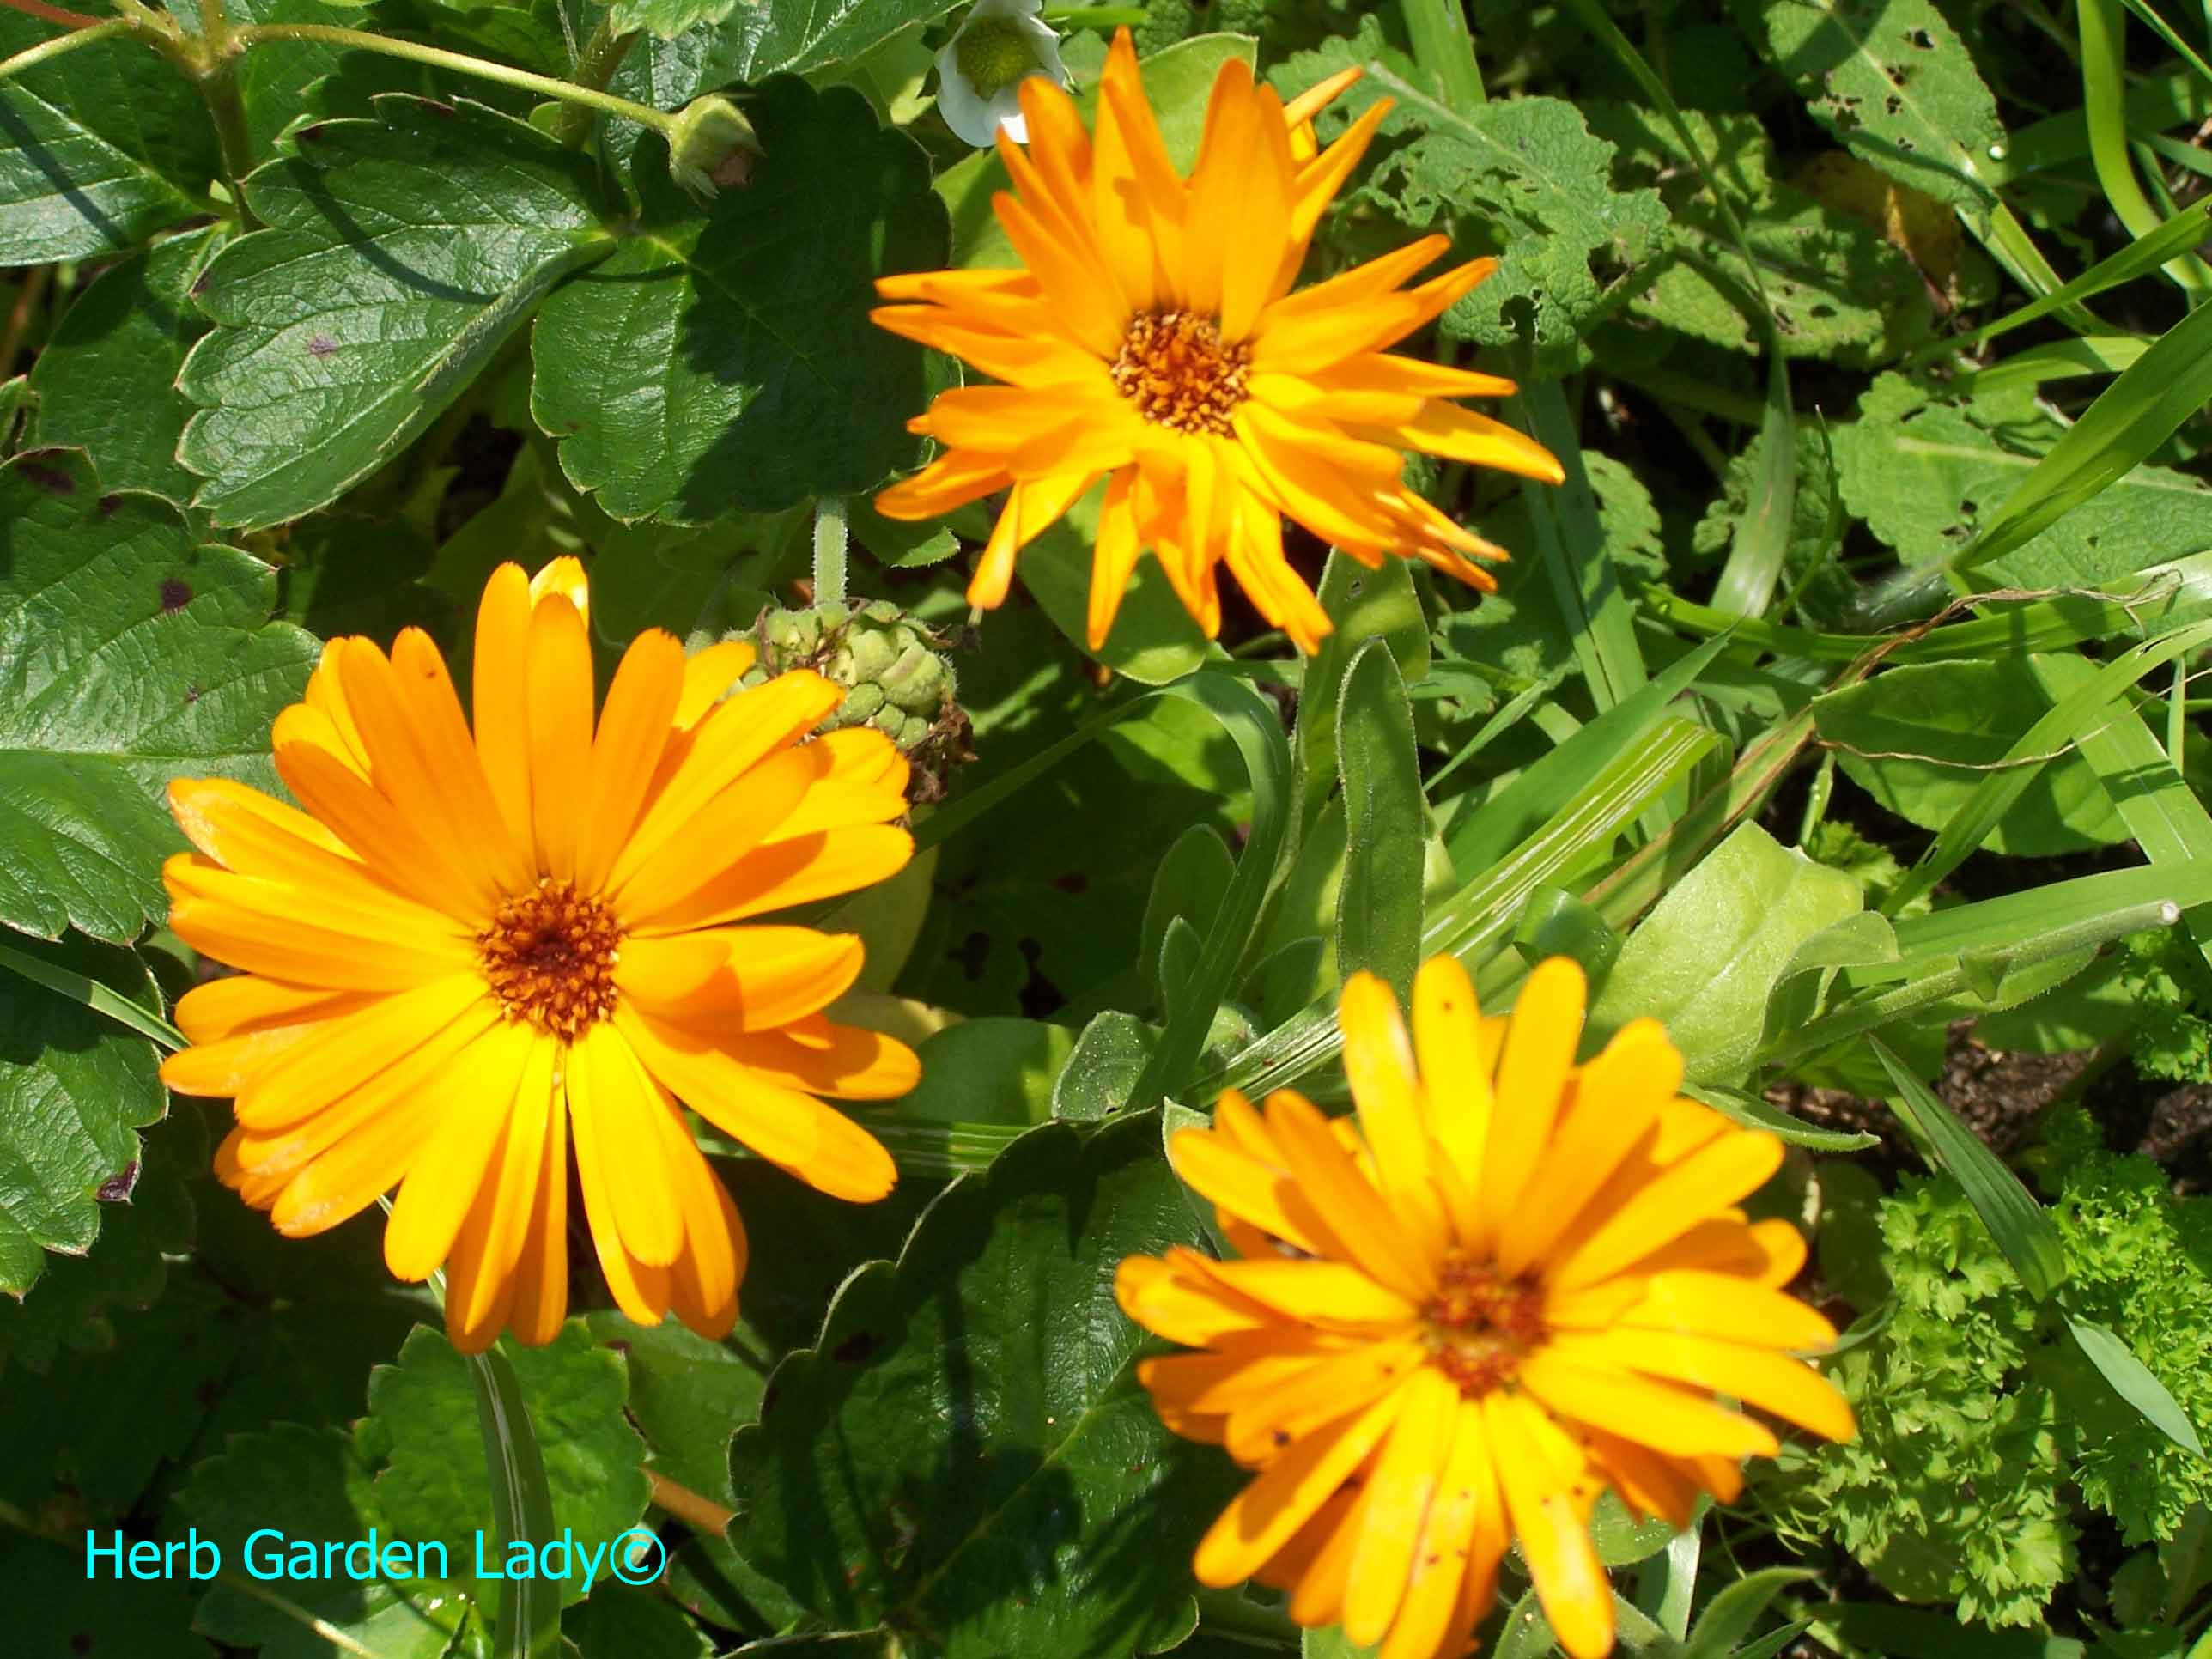 Calendula herb is invaluable in first-aid skin lotions, ointments or soaps.